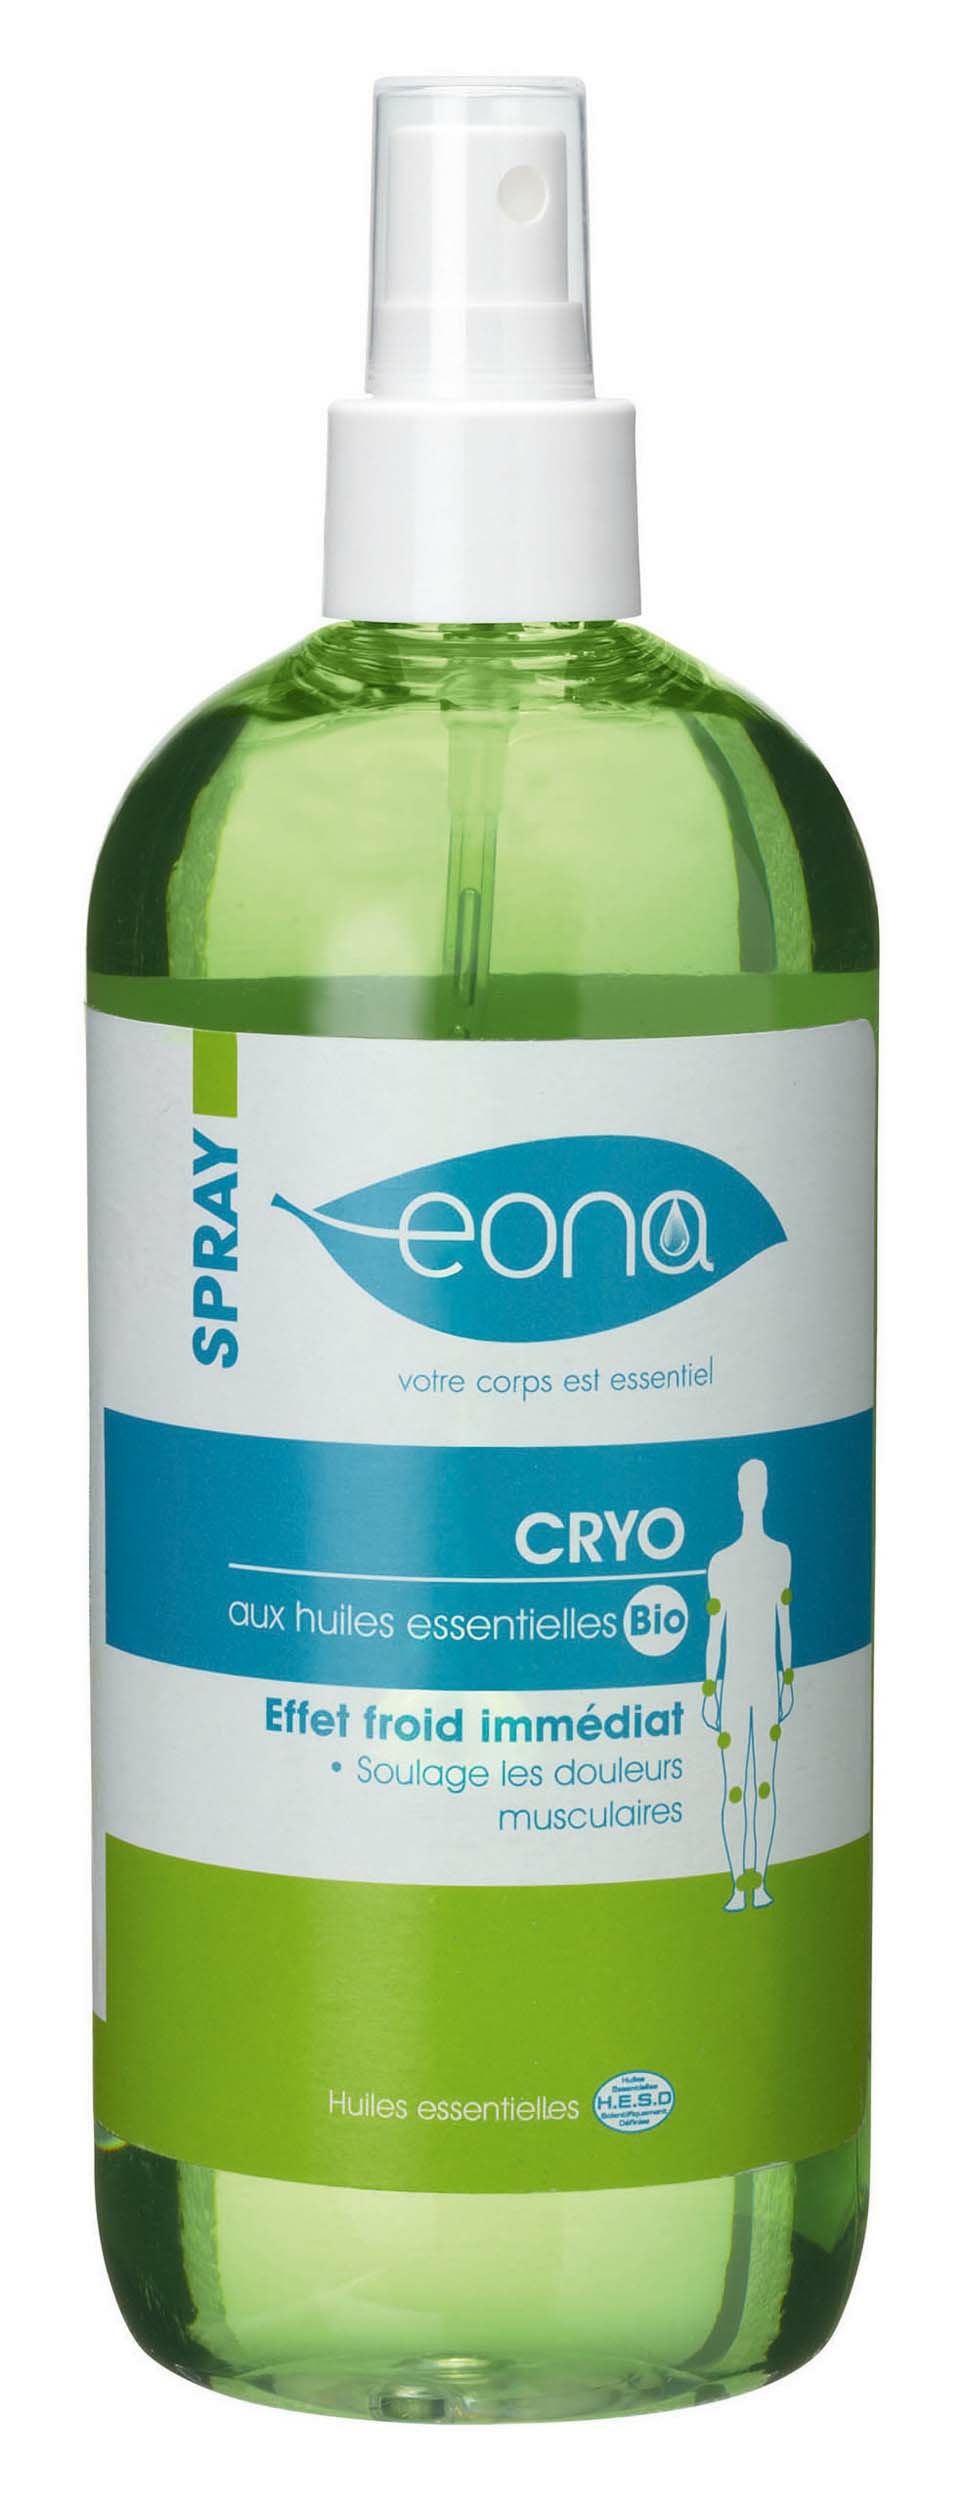 spray cryo effet froid 500 ml soulage immediatement douleur musculaire tendinite tablelya 2101405000-1